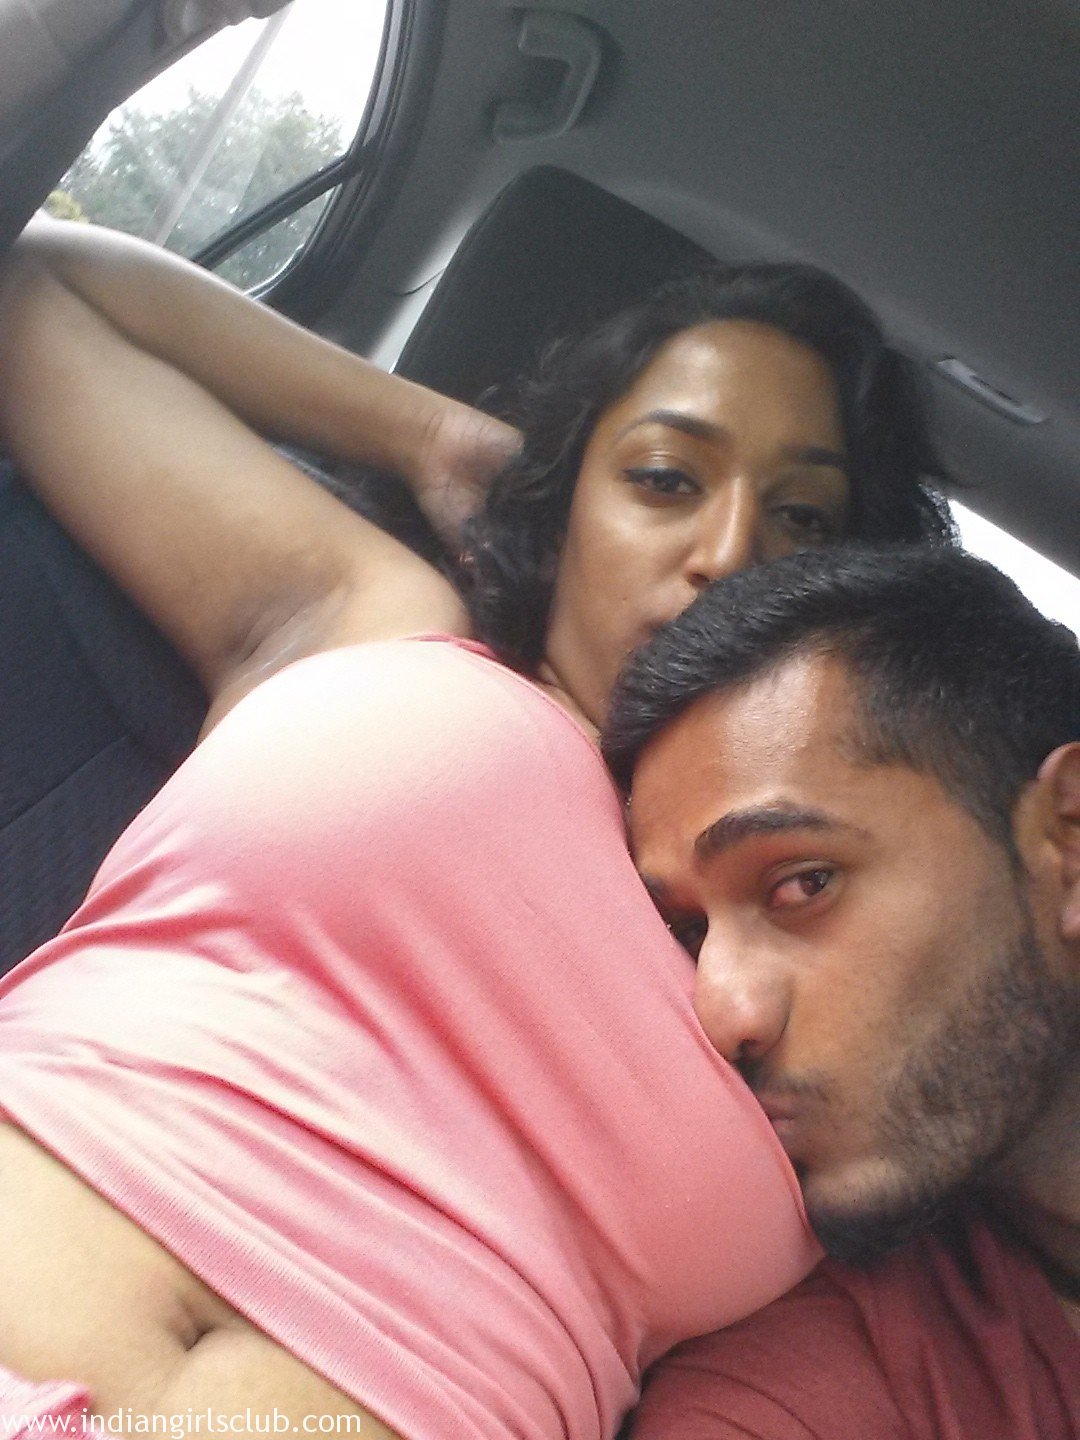 Indian couple sex in car